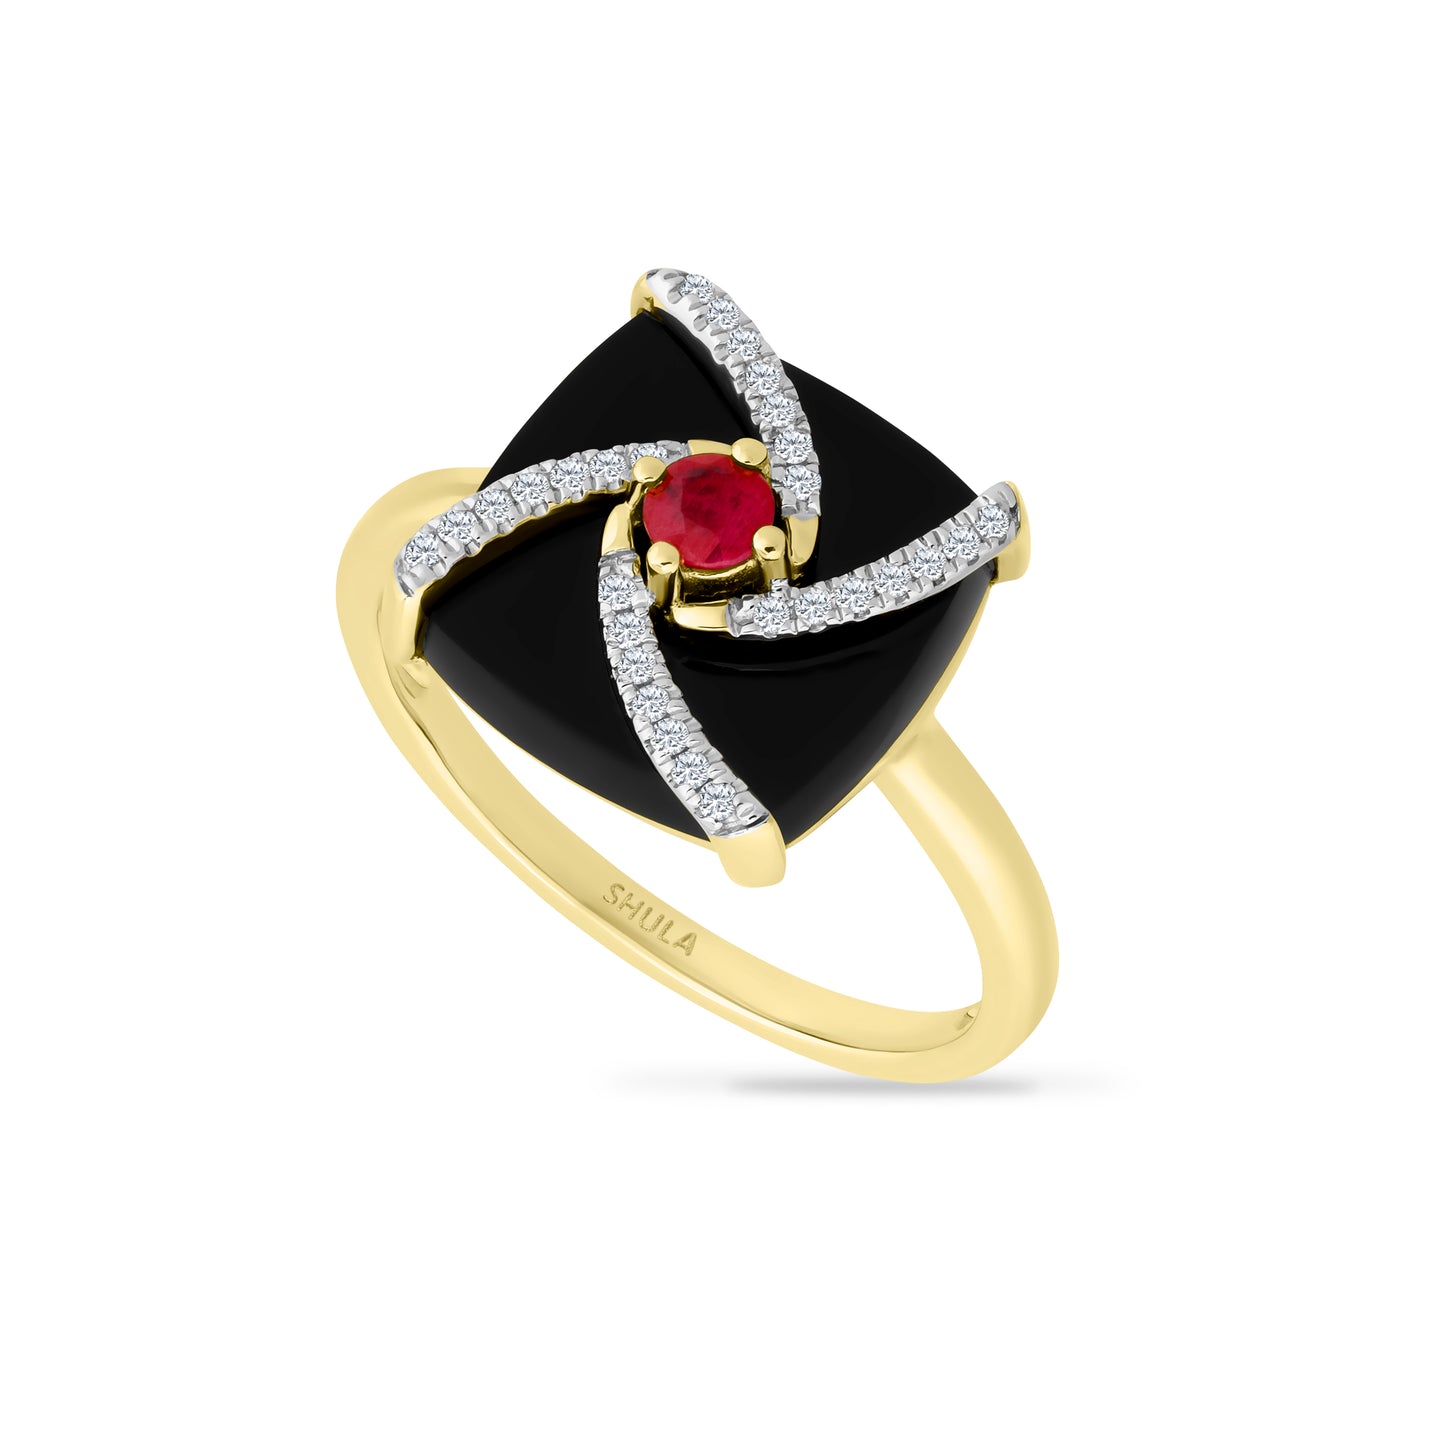 14K SQUARE SHAPED RING WITH 28 DIAMONDS 0.09CT, 1 RUBY 0.16CT & BLACK ONYX